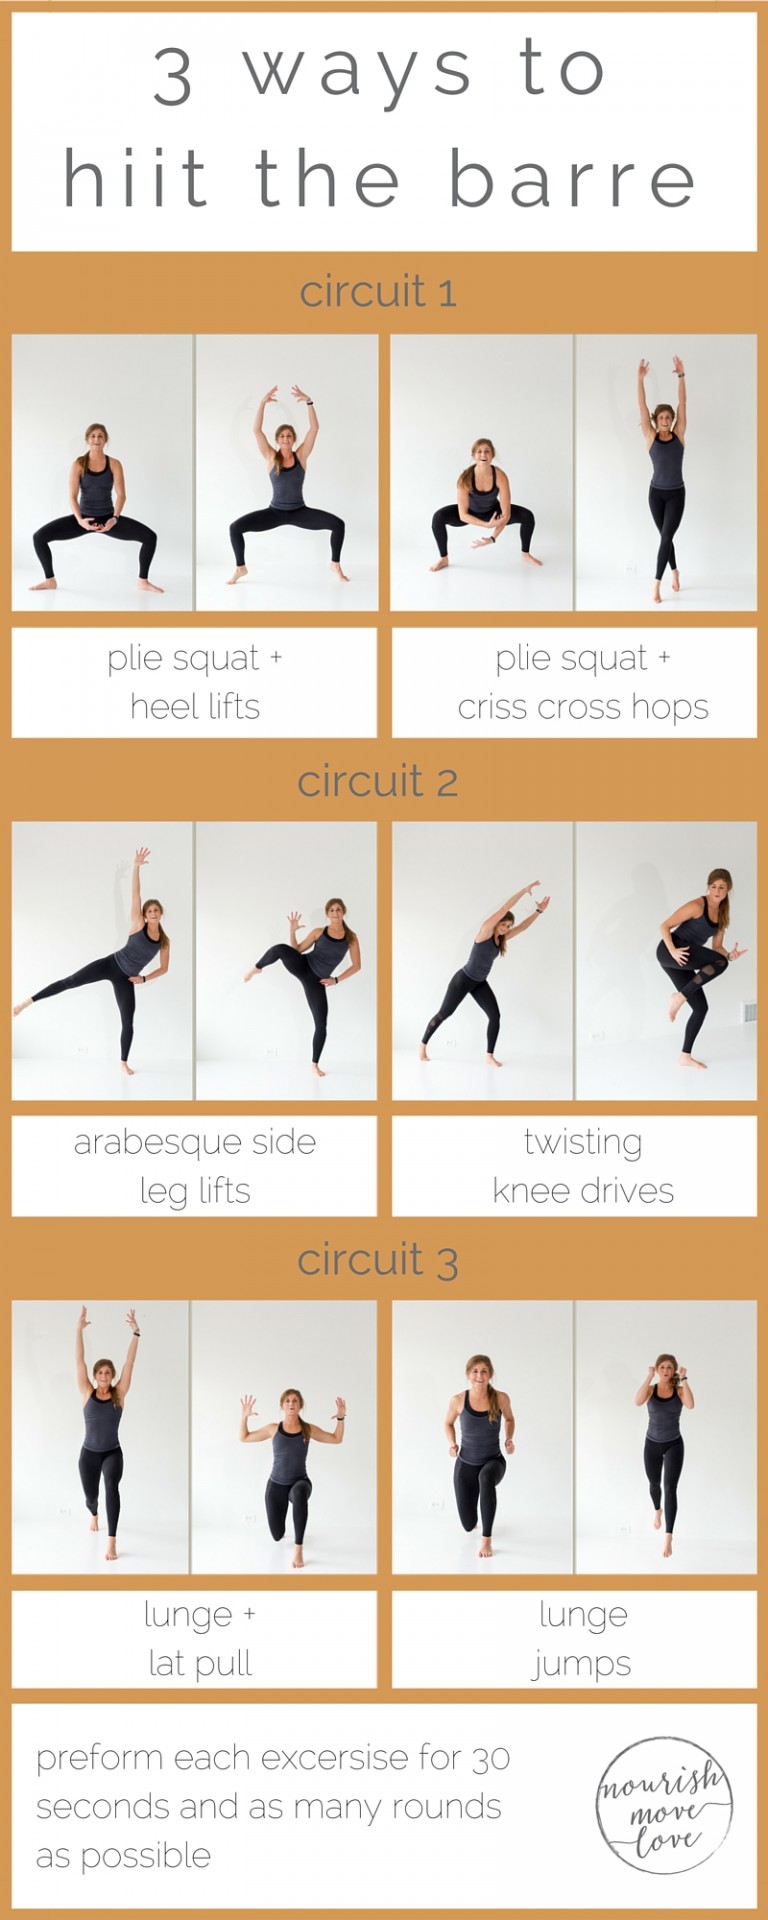 3-ways-to-hiit-the-barre-768x1920